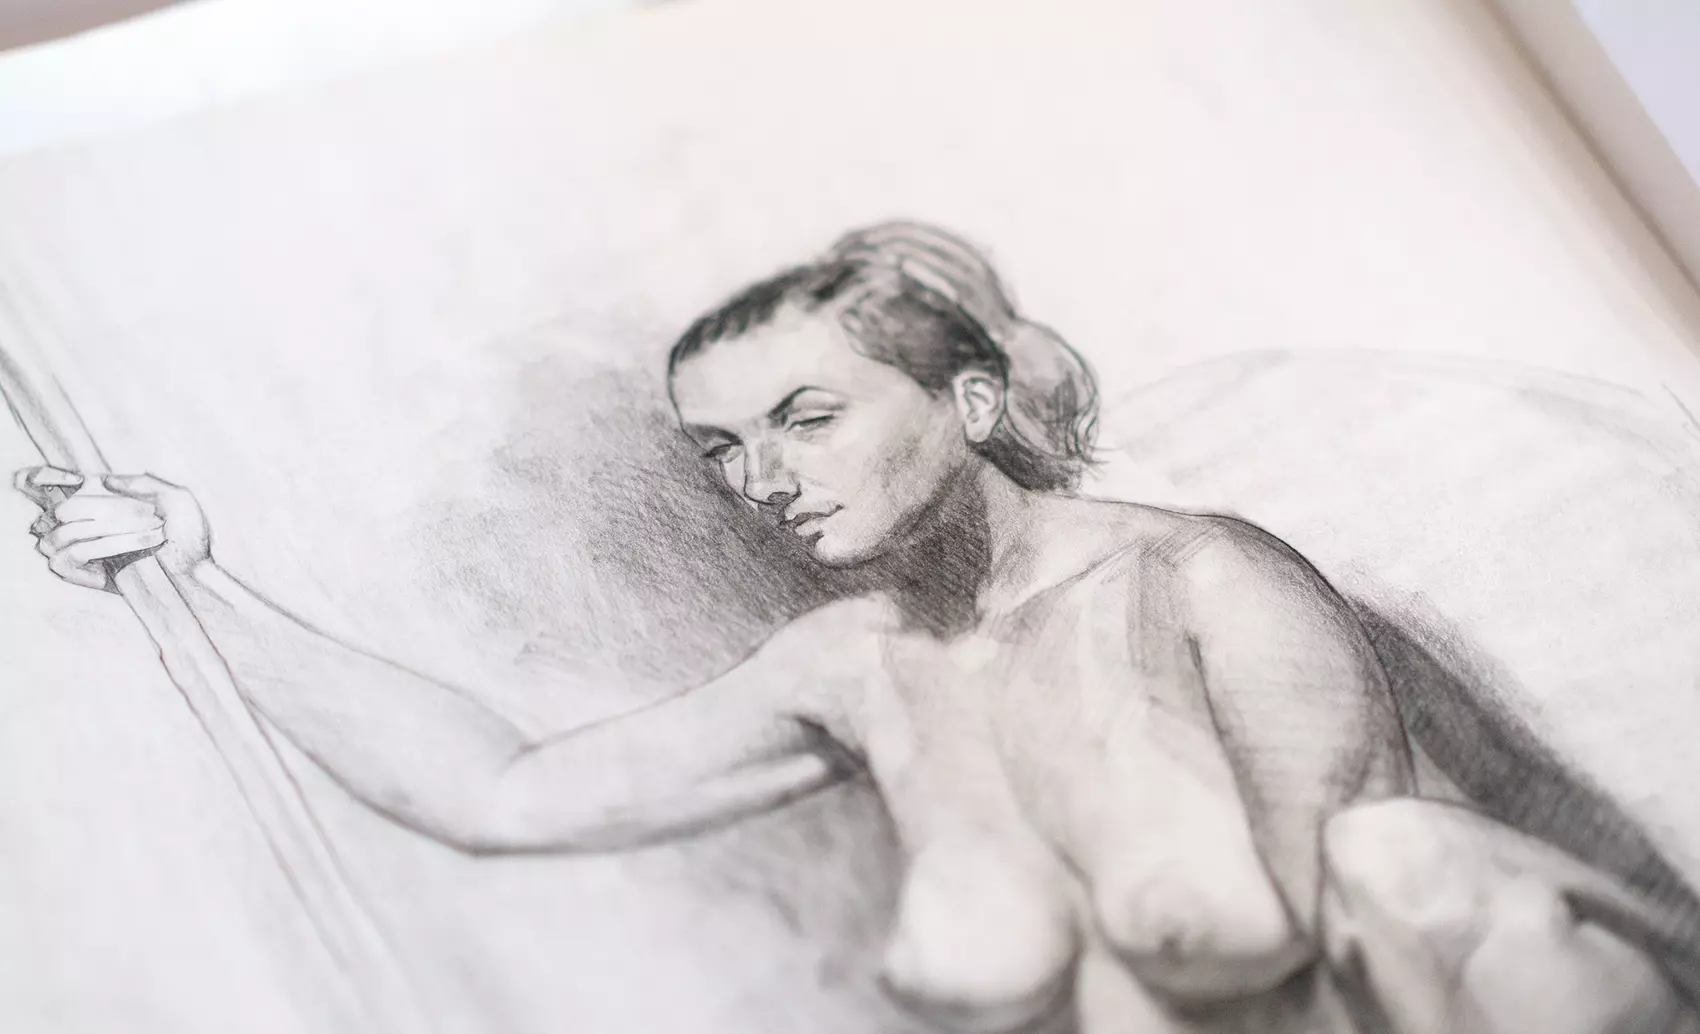 Charcoal drawing of a woman